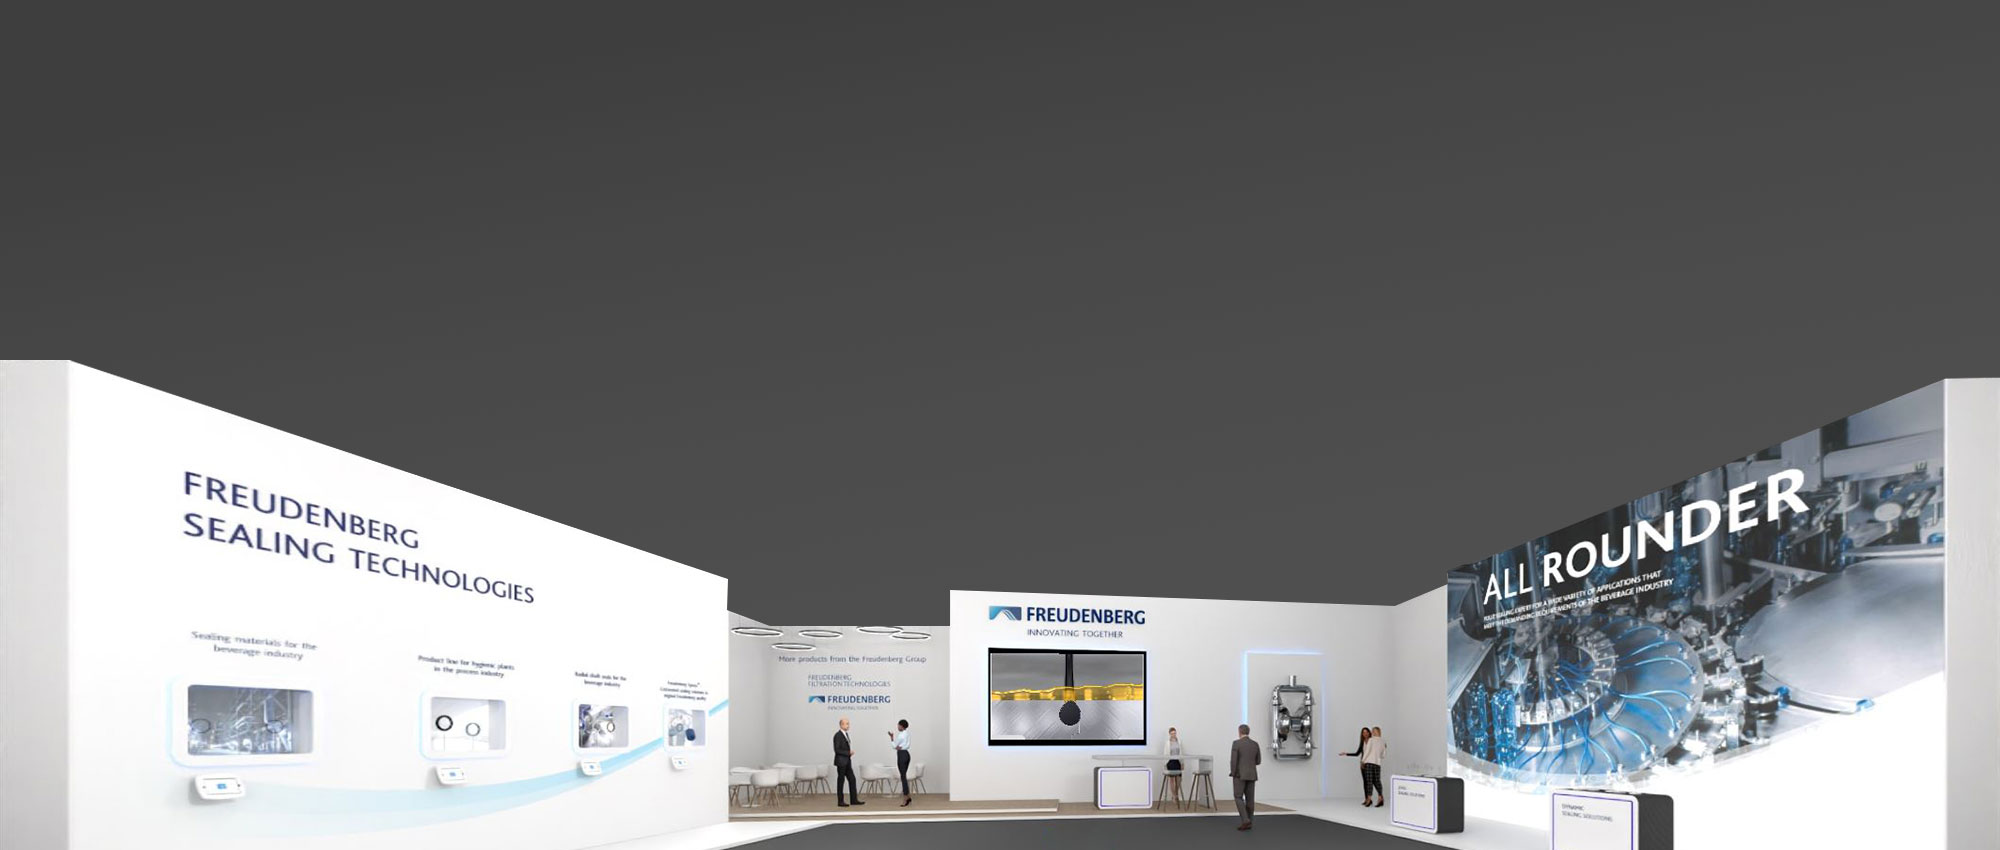 3D rendering of an FST virtual booth; on the left, a white booth wall with Freudenberg Sealing Technologies lettering and four recessed shelves containing products, and on the right, a booth wall with the words 